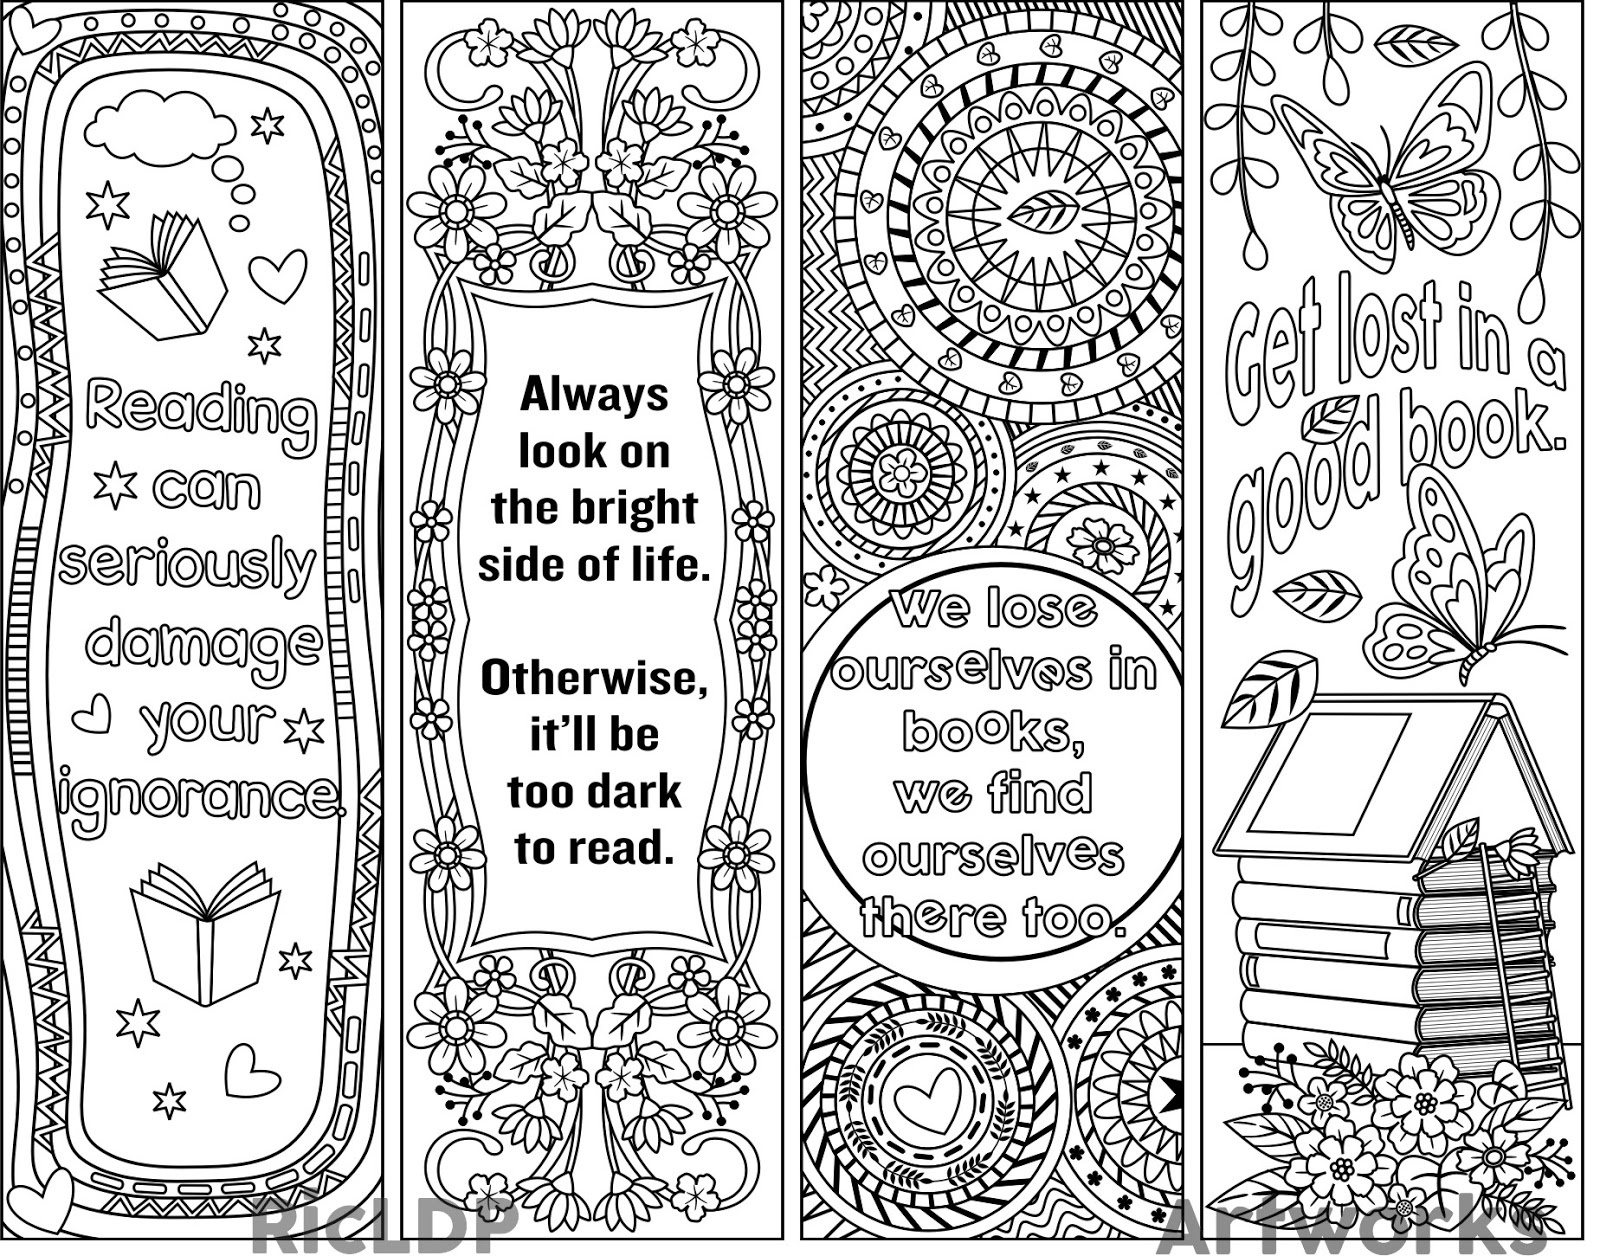 Free Printable Dragon Bookmarks To Color (75+ Images In Collection